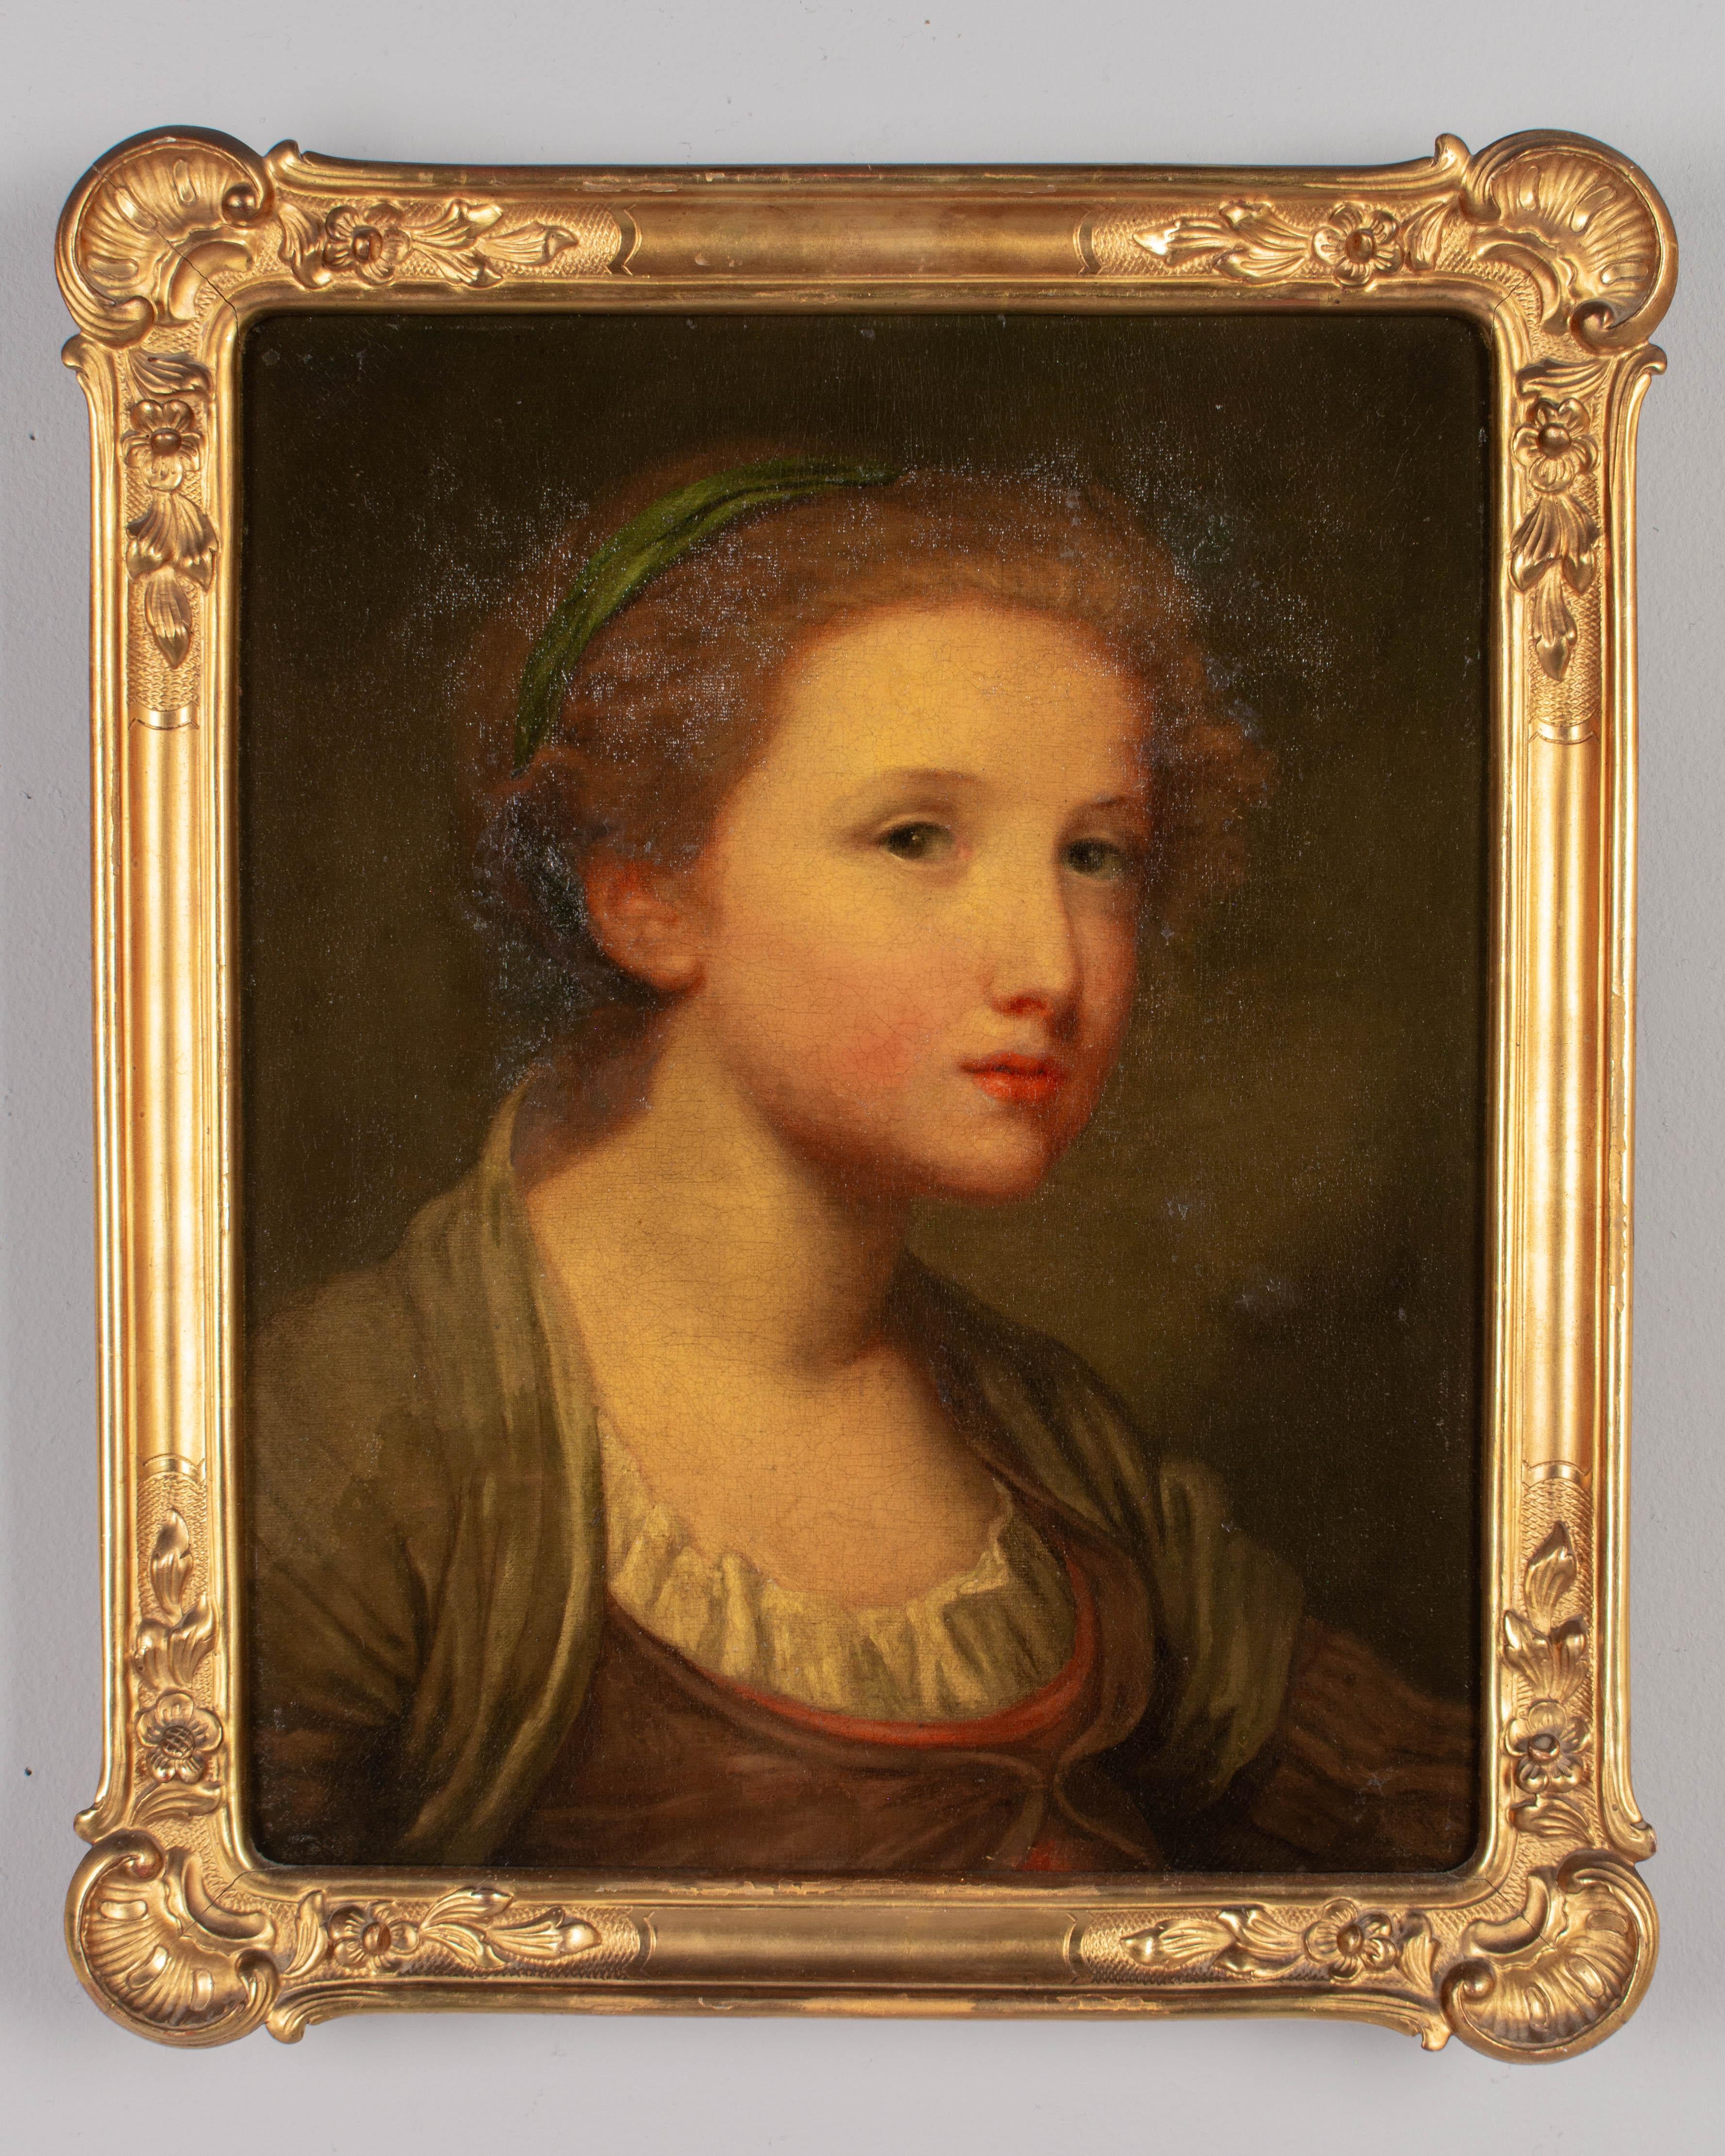 A 19th century portrait of a young girl attributed to French artist Jean-Baptiste Greuze (1725-1805). Oil on canvas. Unsigned, possibly an early copy of this prolific painter who was known for his charming portraits. In a period giltwood frame with